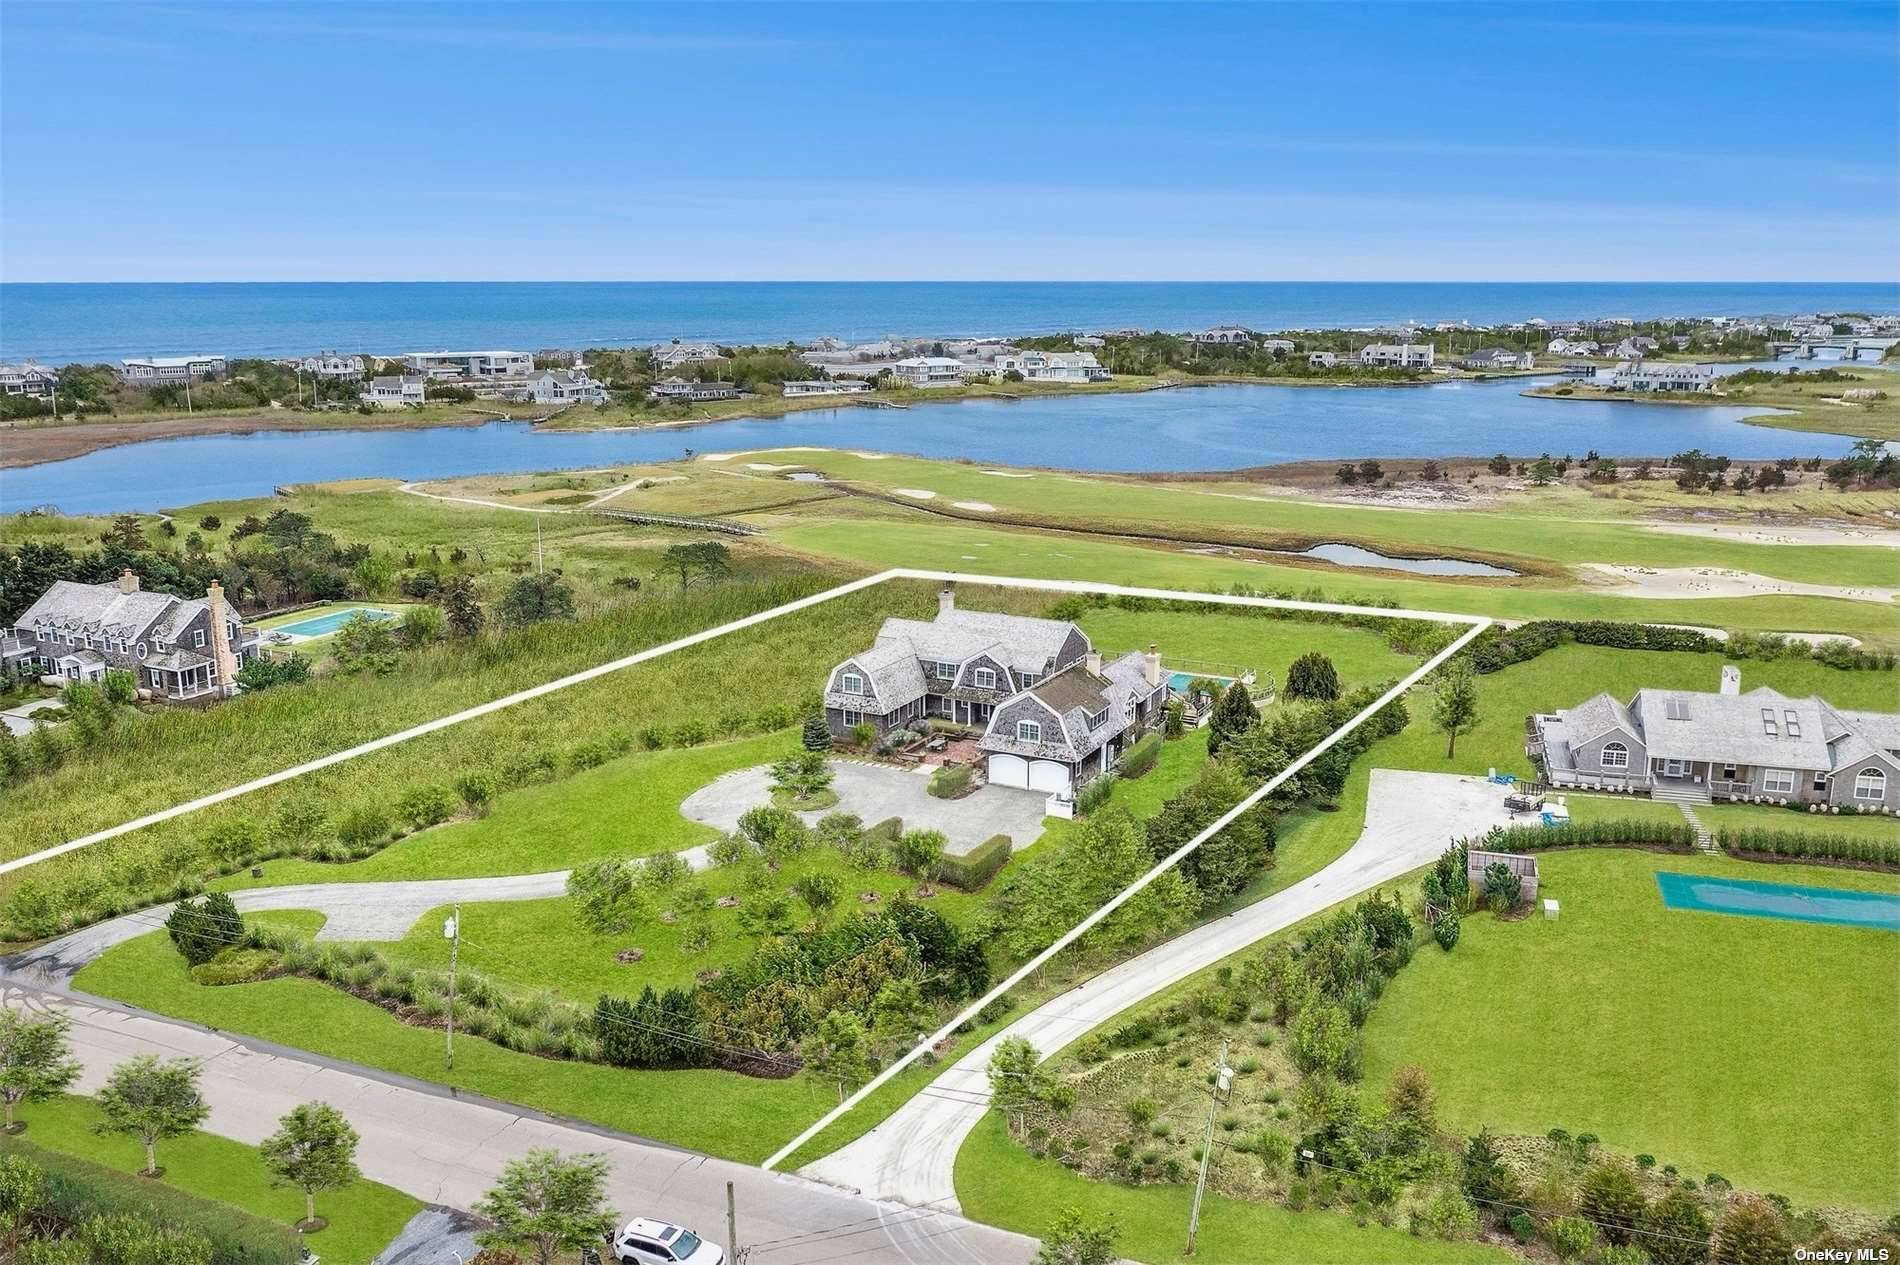 Located on Shinnecock Road in the coveted Estate Section of Quogue Village, this timeless estate set on 2 acres overlooks the picturesque greens of the Quogue Field Club and the ...